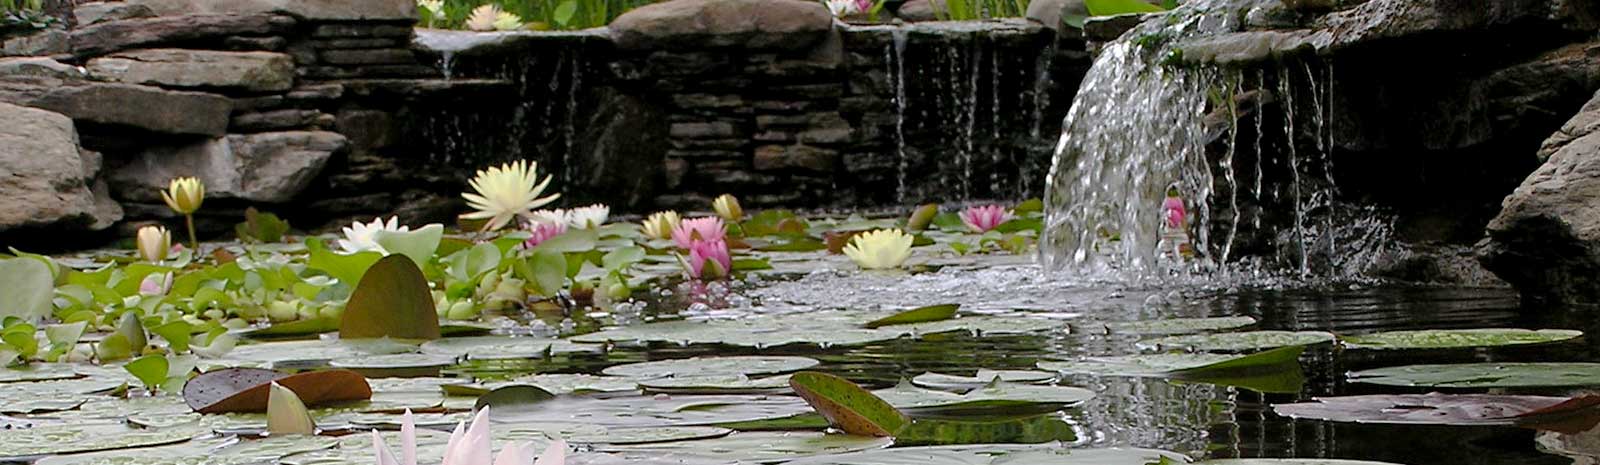 Crystal clear pond with lillies and a waterfall Pondscapes cleaning services are the best in Maryland.